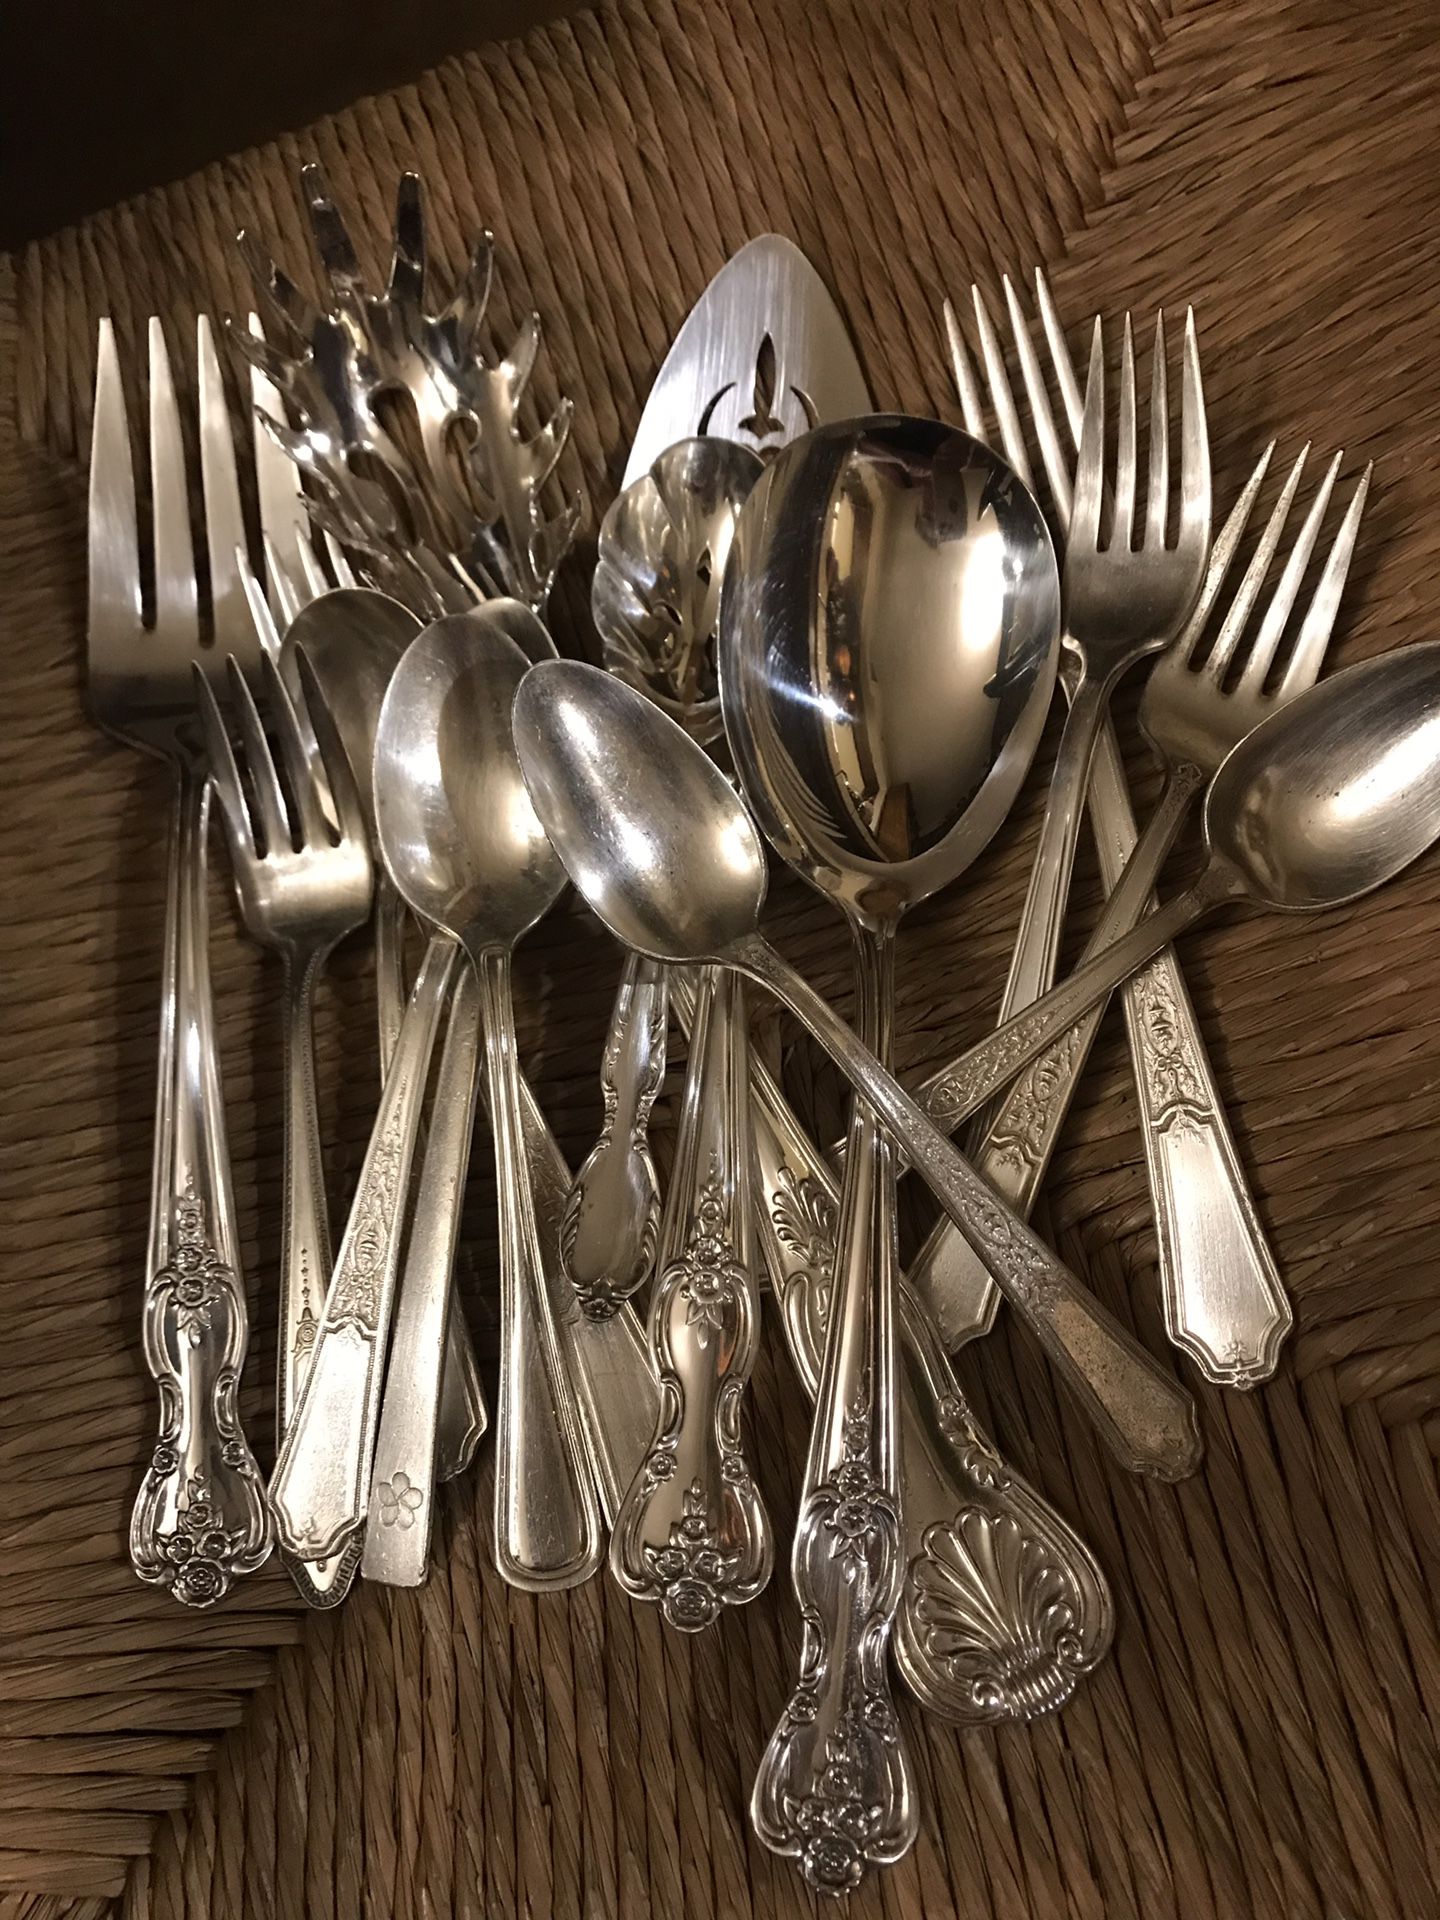 Assorted silverplated silverware